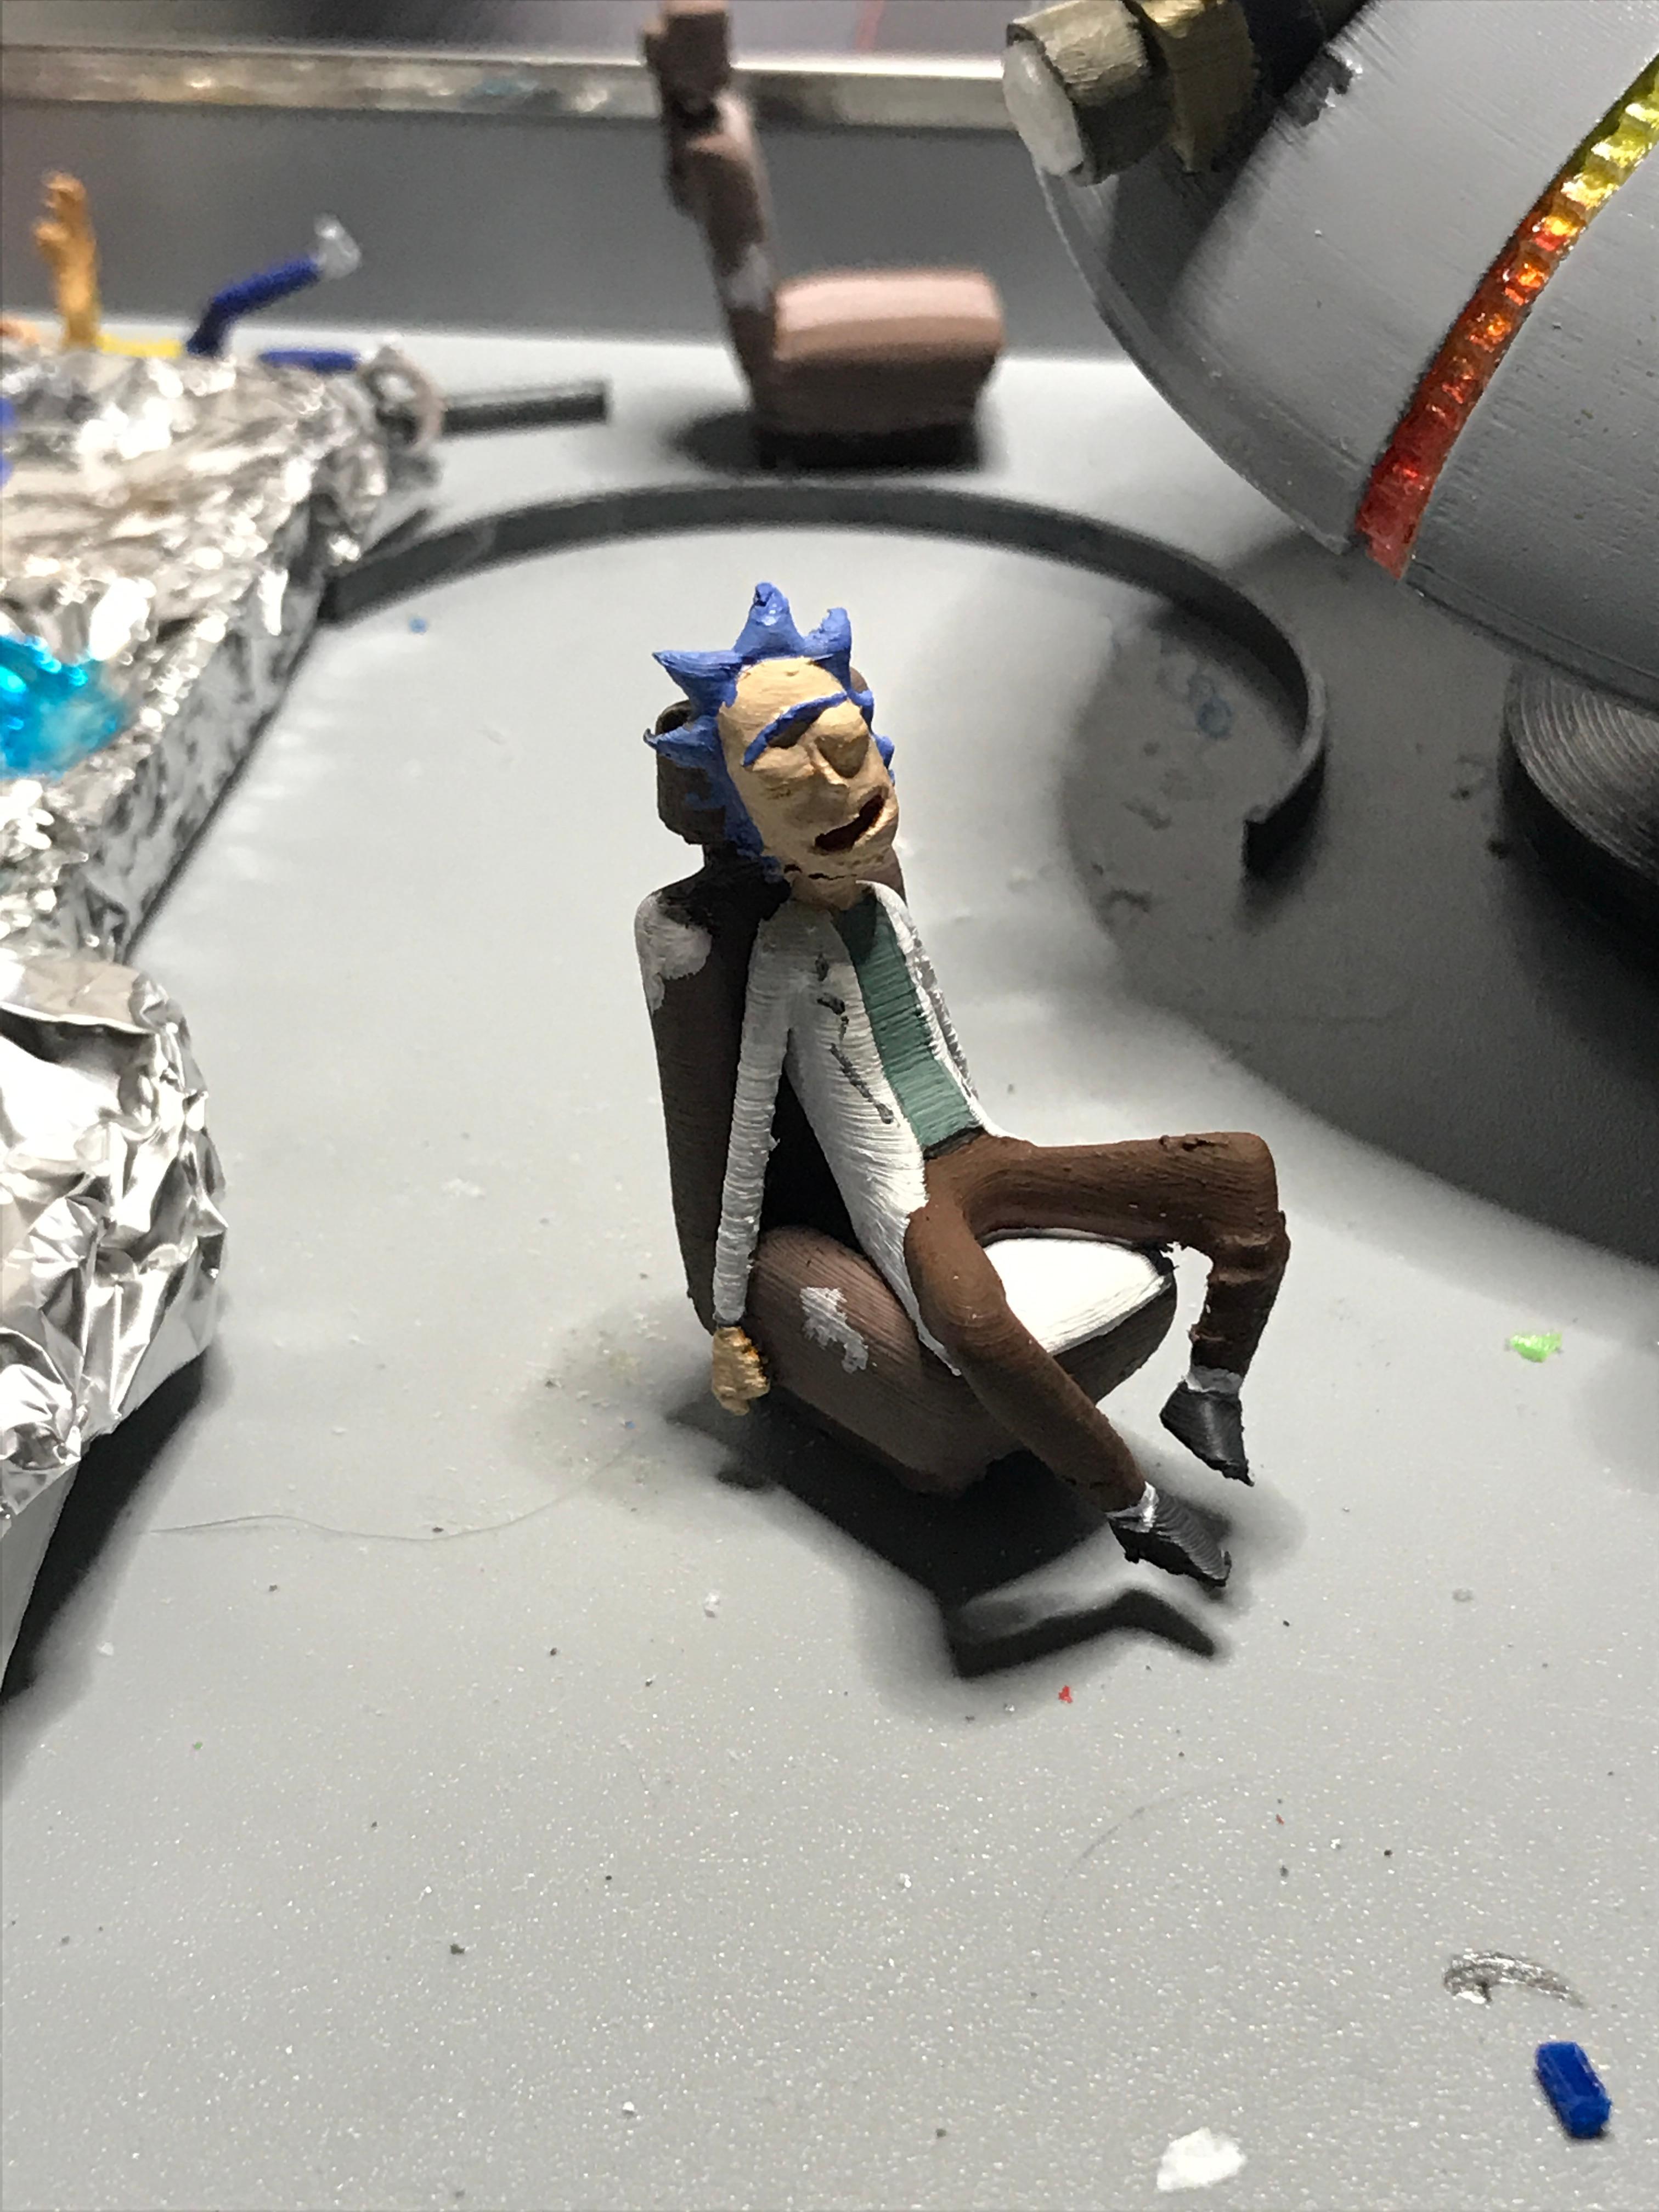 Rick and Morty flying car with LED lights 3d model